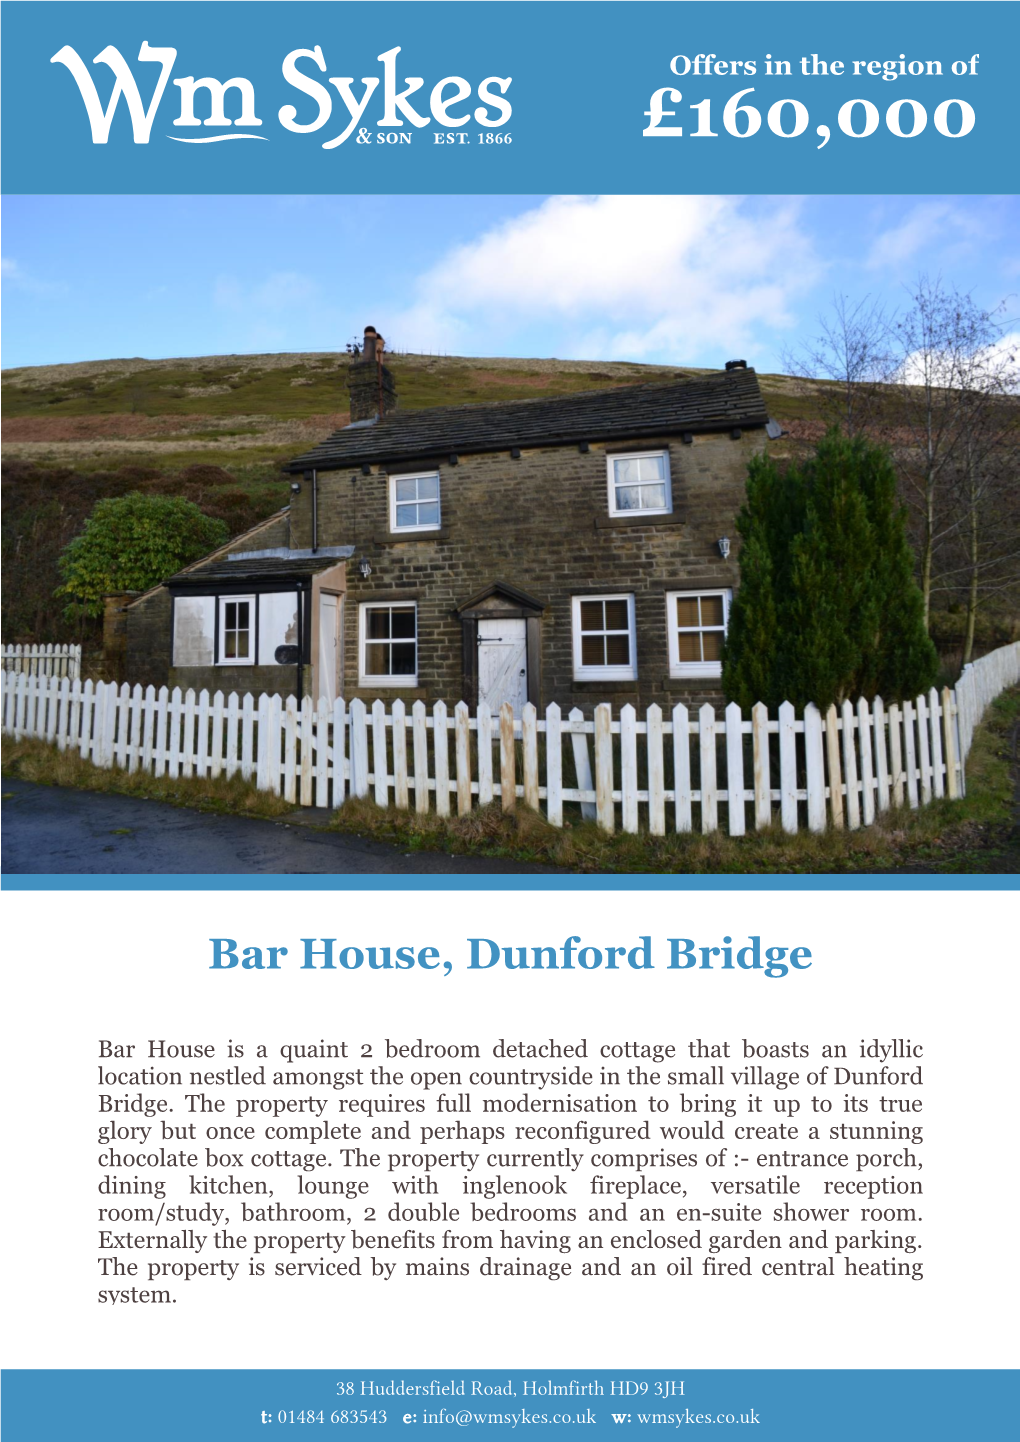 Offers in the Region of £160000 Bar House, Dunford Bridge